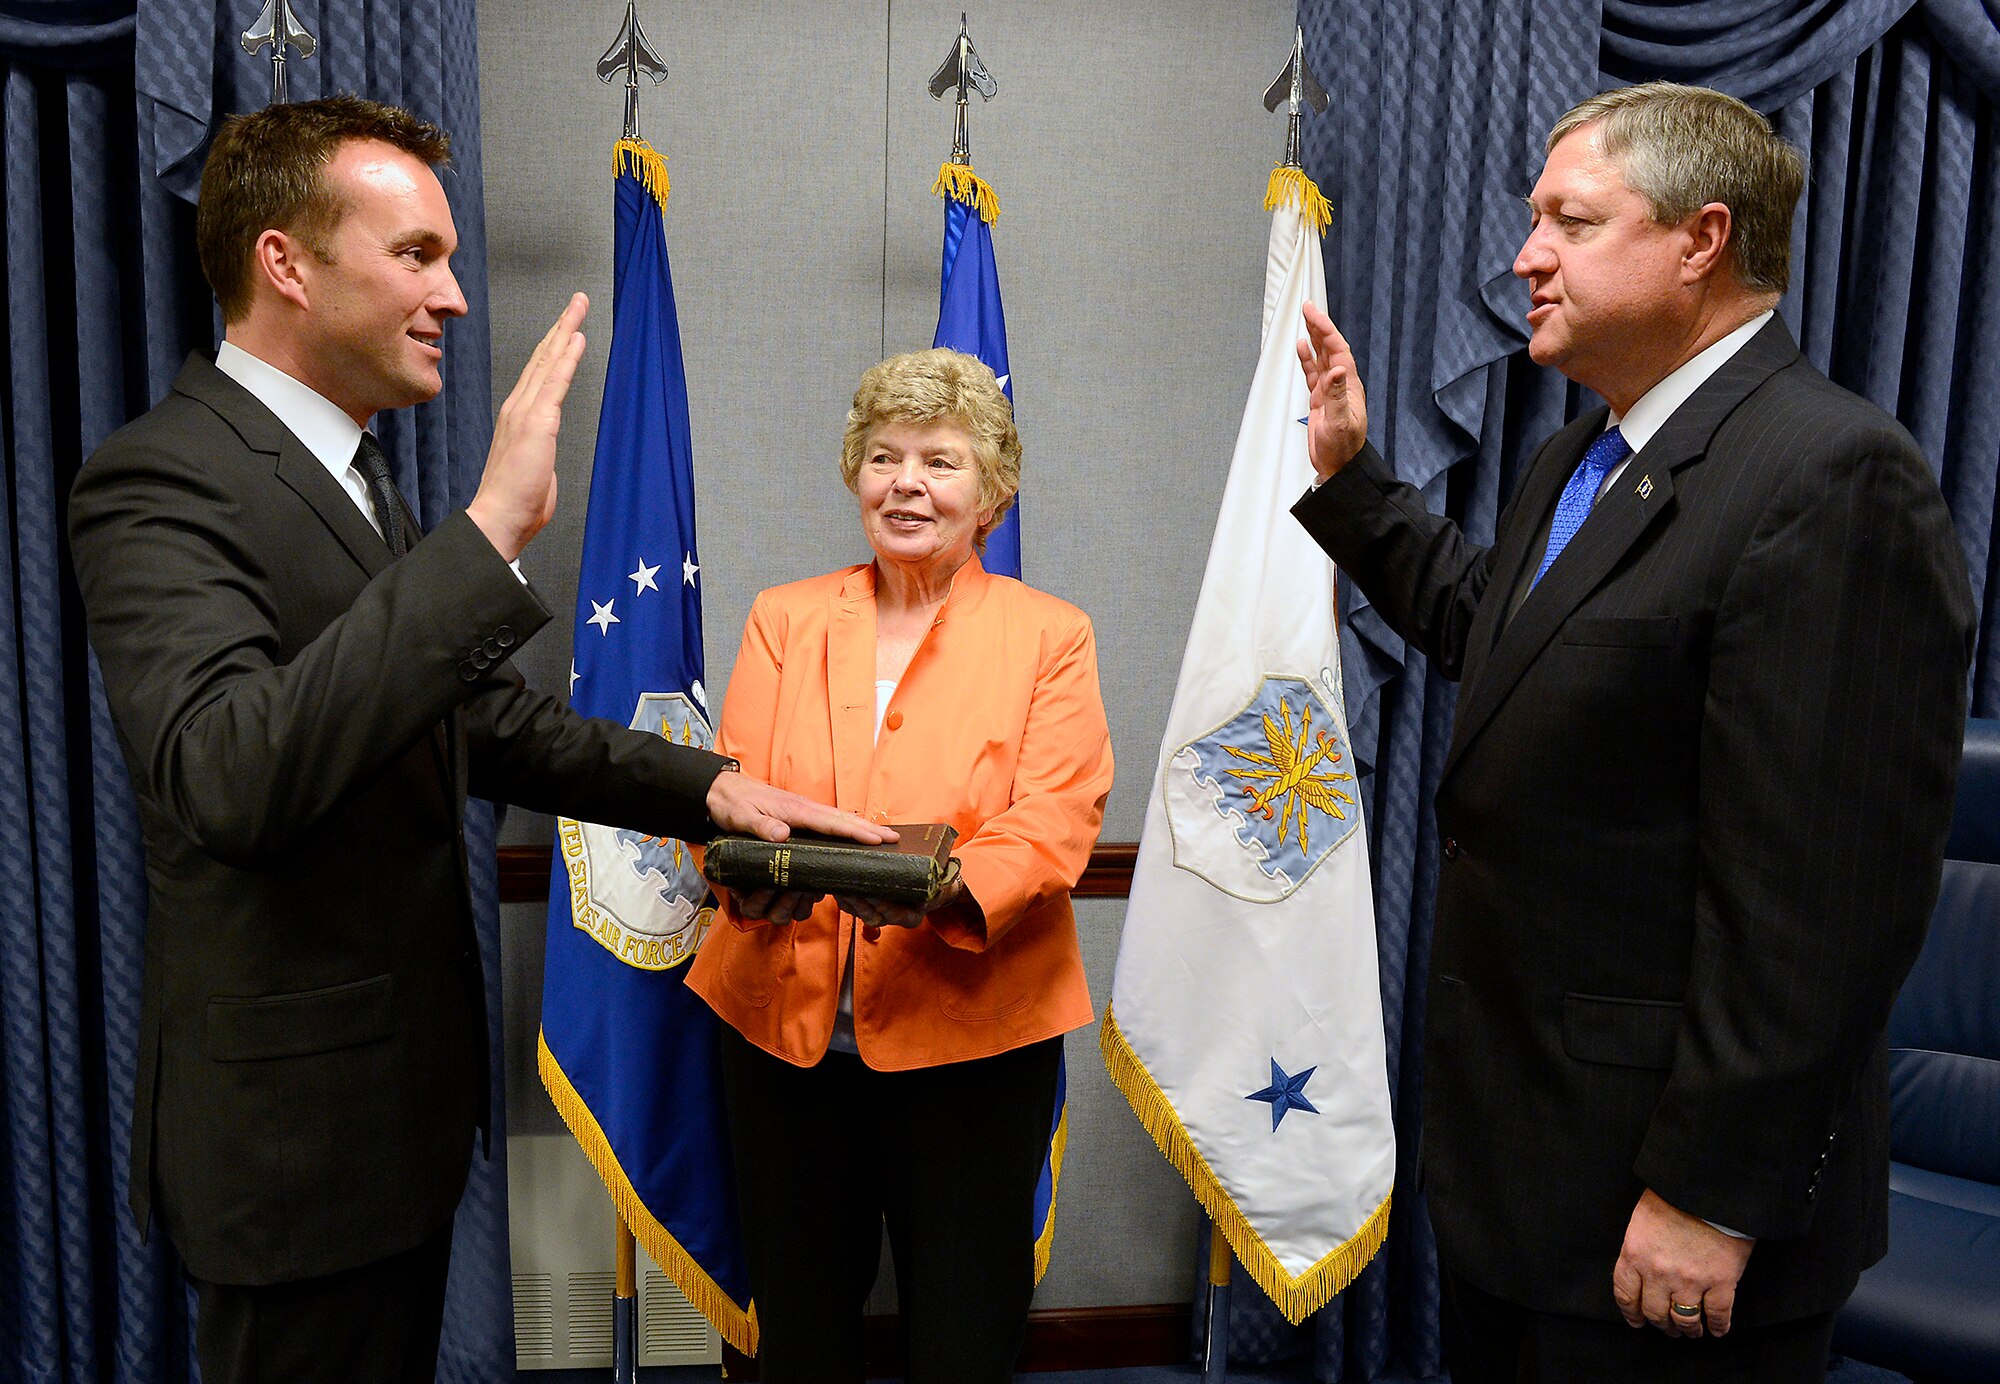 Secretary of the Air Force Michael Donley (right) administers the oath of office to the new under secretary of the Air Force, Eric Fanning, in a formal  ceremony May 31, 2013, at the Pentagon.  In his duties, Fanning will be responsible for the efficient and effective management of Air Force resources and serve as the senior Air Force energy official. Additionally, he will serve as the focal point for space operations, policy and acquisition issues on the Air Force staff. (U.S. Air Force photo/Scott M. Ash)